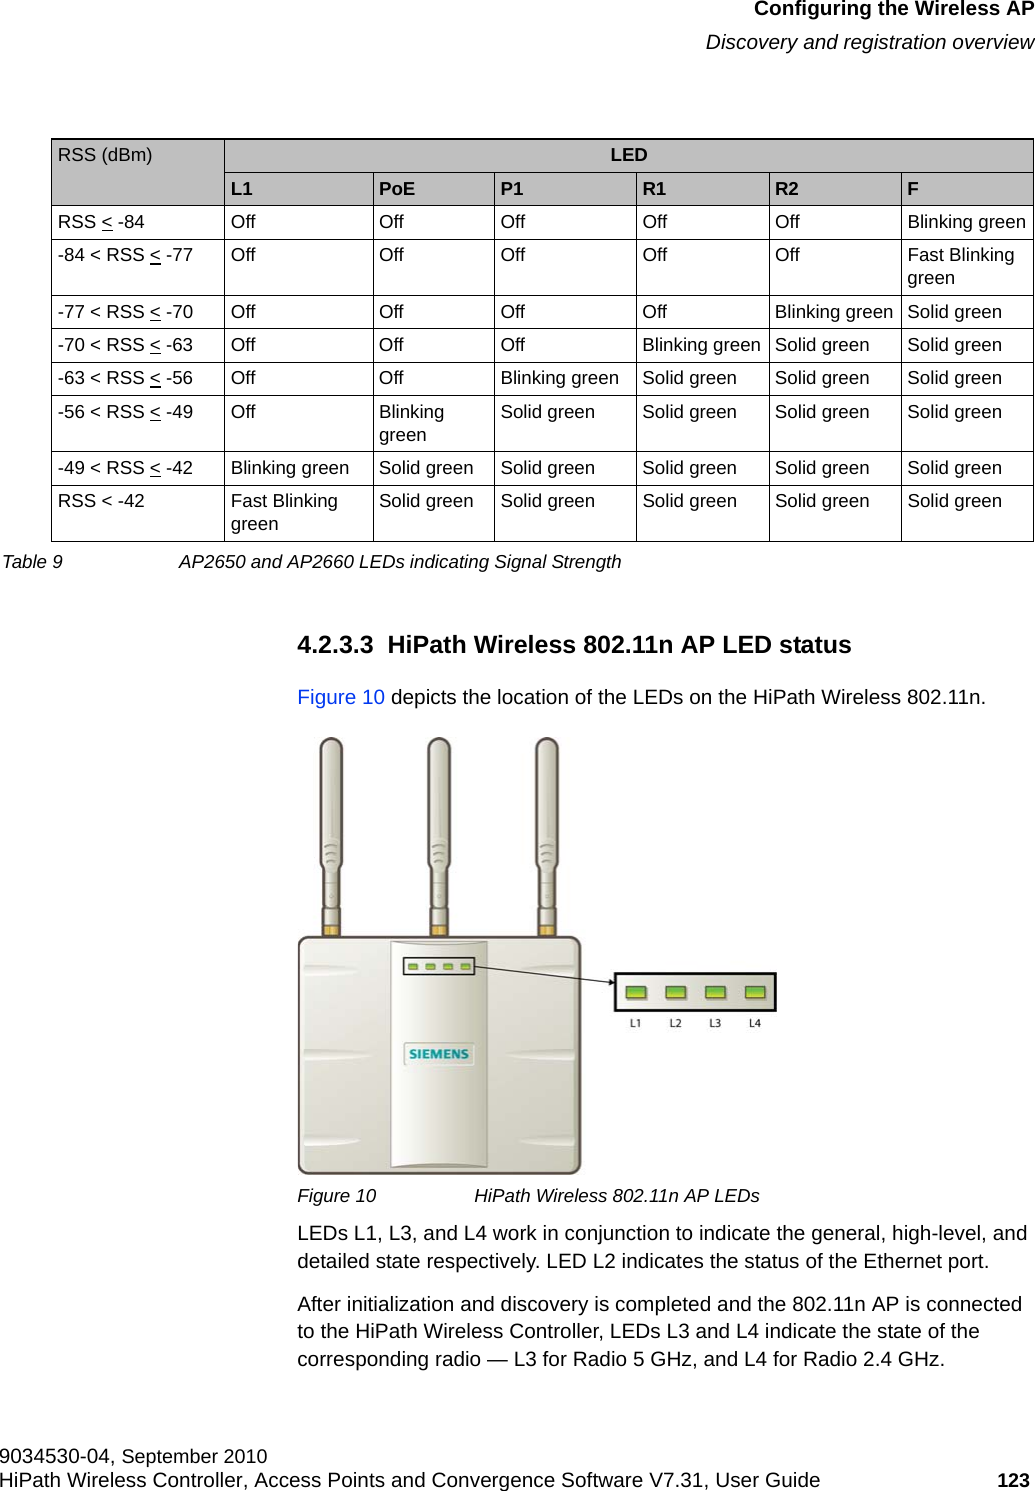 hwc_apstartup.fmConfiguring the Wireless APDiscovery and registration overview9034530-04, September 2010HiPath Wireless Controller, Access Points and Convergence Software V7.31, User Guide 123         4.2.3.3  HiPath Wireless 802.11n AP LED statusFigure 10 depicts the location of the LEDs on the HiPath Wireless 802.11n.Figure 10 HiPath Wireless 802.11n AP LEDsLEDs L1, L3, and L4 work in conjunction to indicate the general, high-level, and detailed state respectively. LED L2 indicates the status of the Ethernet port.After initialization and discovery is completed and the 802.11n AP is connected to the HiPath Wireless Controller, LEDs L3 and L4 indicate the state of the corresponding radio — L3 for Radio 5 GHz, and L4 for Radio 2.4 GHz.RSS (dBm) LEDL1  PoE  P1  R1  R2  F RSS &lt; -84 Off Off Off Off Off Blinking green-84 &lt; RSS &lt; -77 Off Off Off Off Off Fast Blinking green-77 &lt; RSS &lt; -70 Off Off Off Off Blinking green Solid green-70 &lt; RSS &lt; -63 Off Off Off Blinking green Solid green Solid green-63 &lt; RSS &lt; -56 Off Off Blinking green Solid green Solid green Solid green-56 &lt; RSS &lt; -49 Off Blinking green Solid green Solid green Solid green Solid green-49 &lt; RSS &lt; -42 Blinking green Solid green Solid green Solid green Solid green Solid greenRSS &lt; -42 Fast Blinking green Solid green Solid green Solid green Solid green Solid greenTable 9 AP2650 and AP2660 LEDs indicating Signal Strength